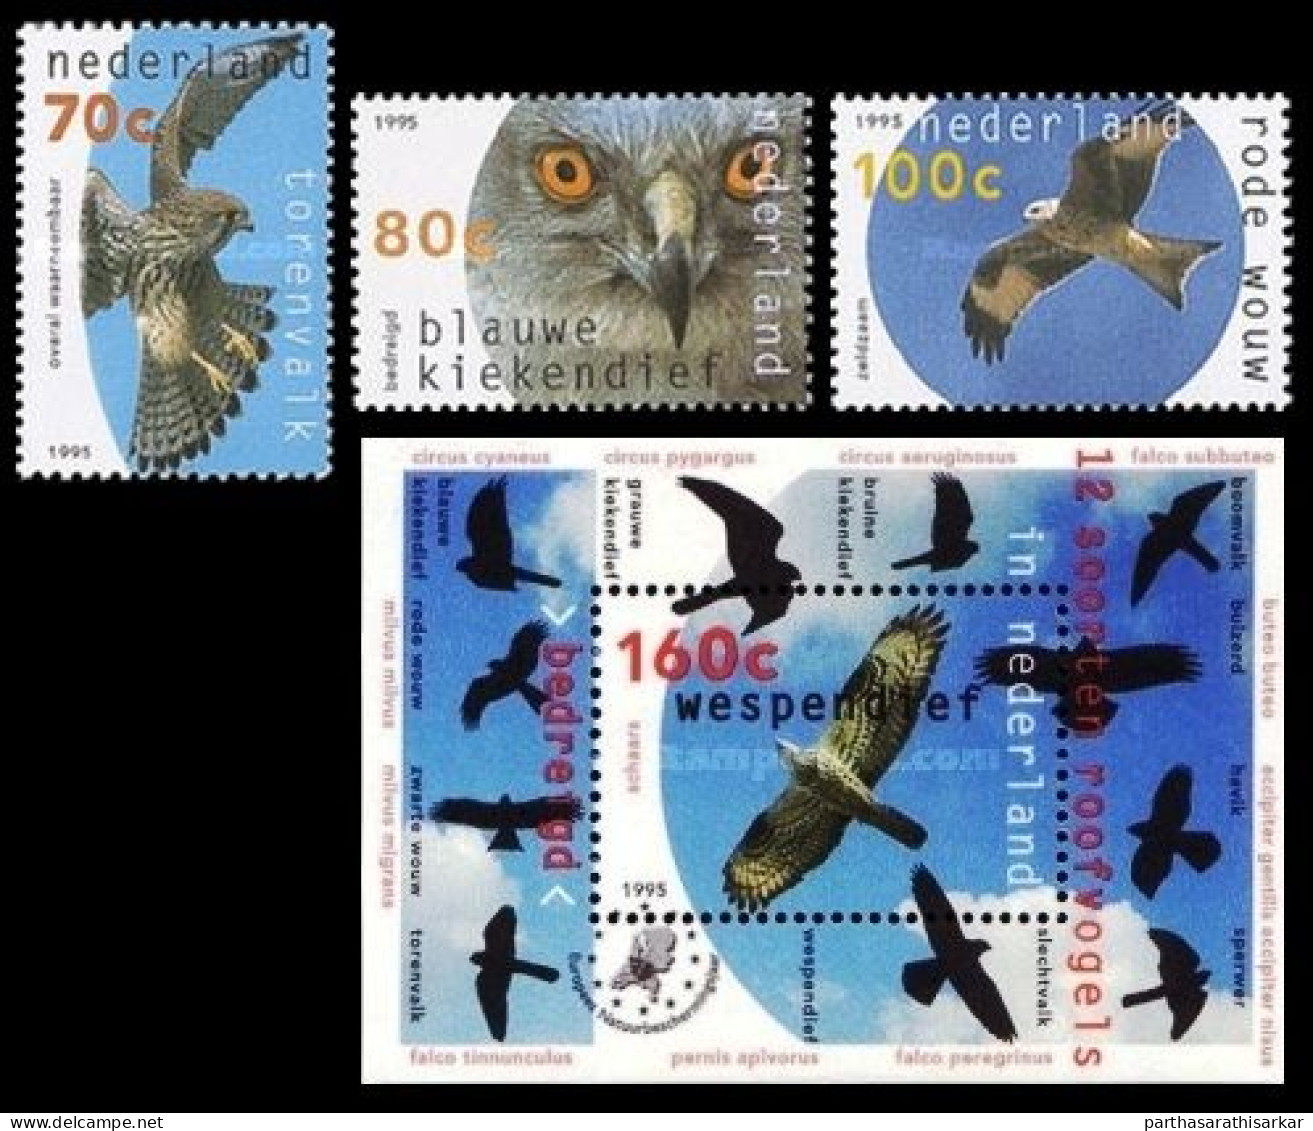 NETHERLANDS 1995 BIRDS OF PREY COMPLETE SET WITH MINIATURE SHEET MS MNH - Arends & Roofvogels